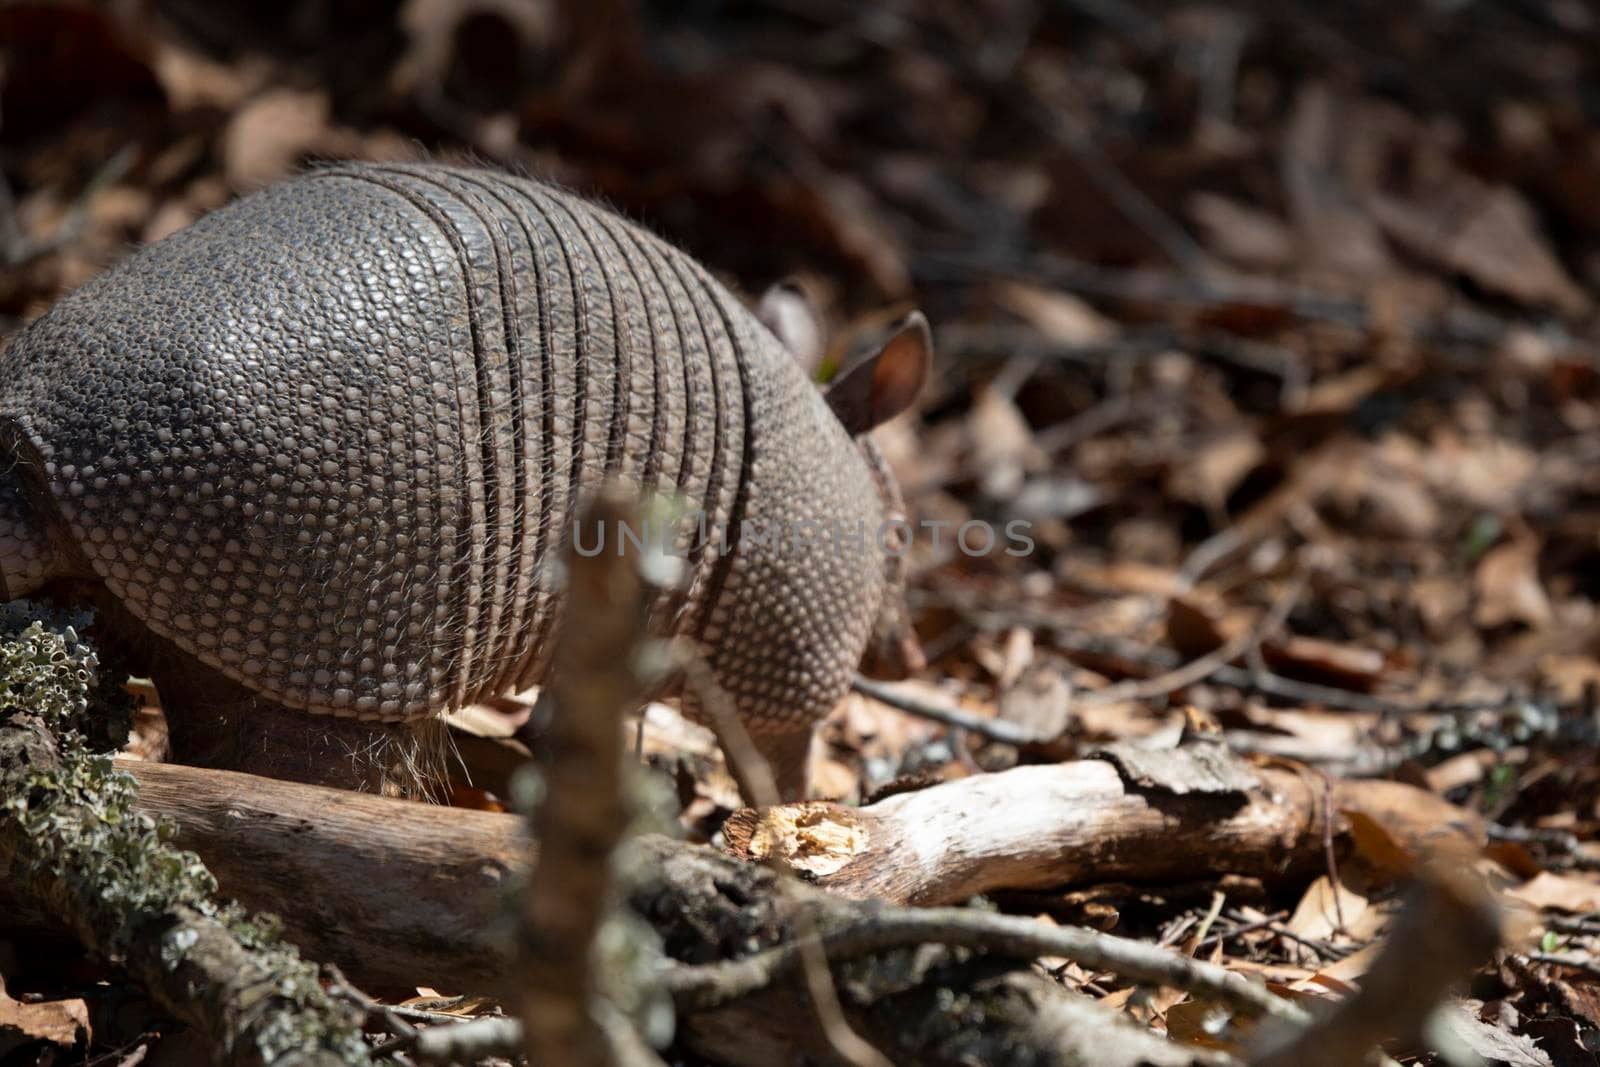 Nine-banded armadillo (Dasypus novemcinctus) foraging for insects in dead leaves and limbs